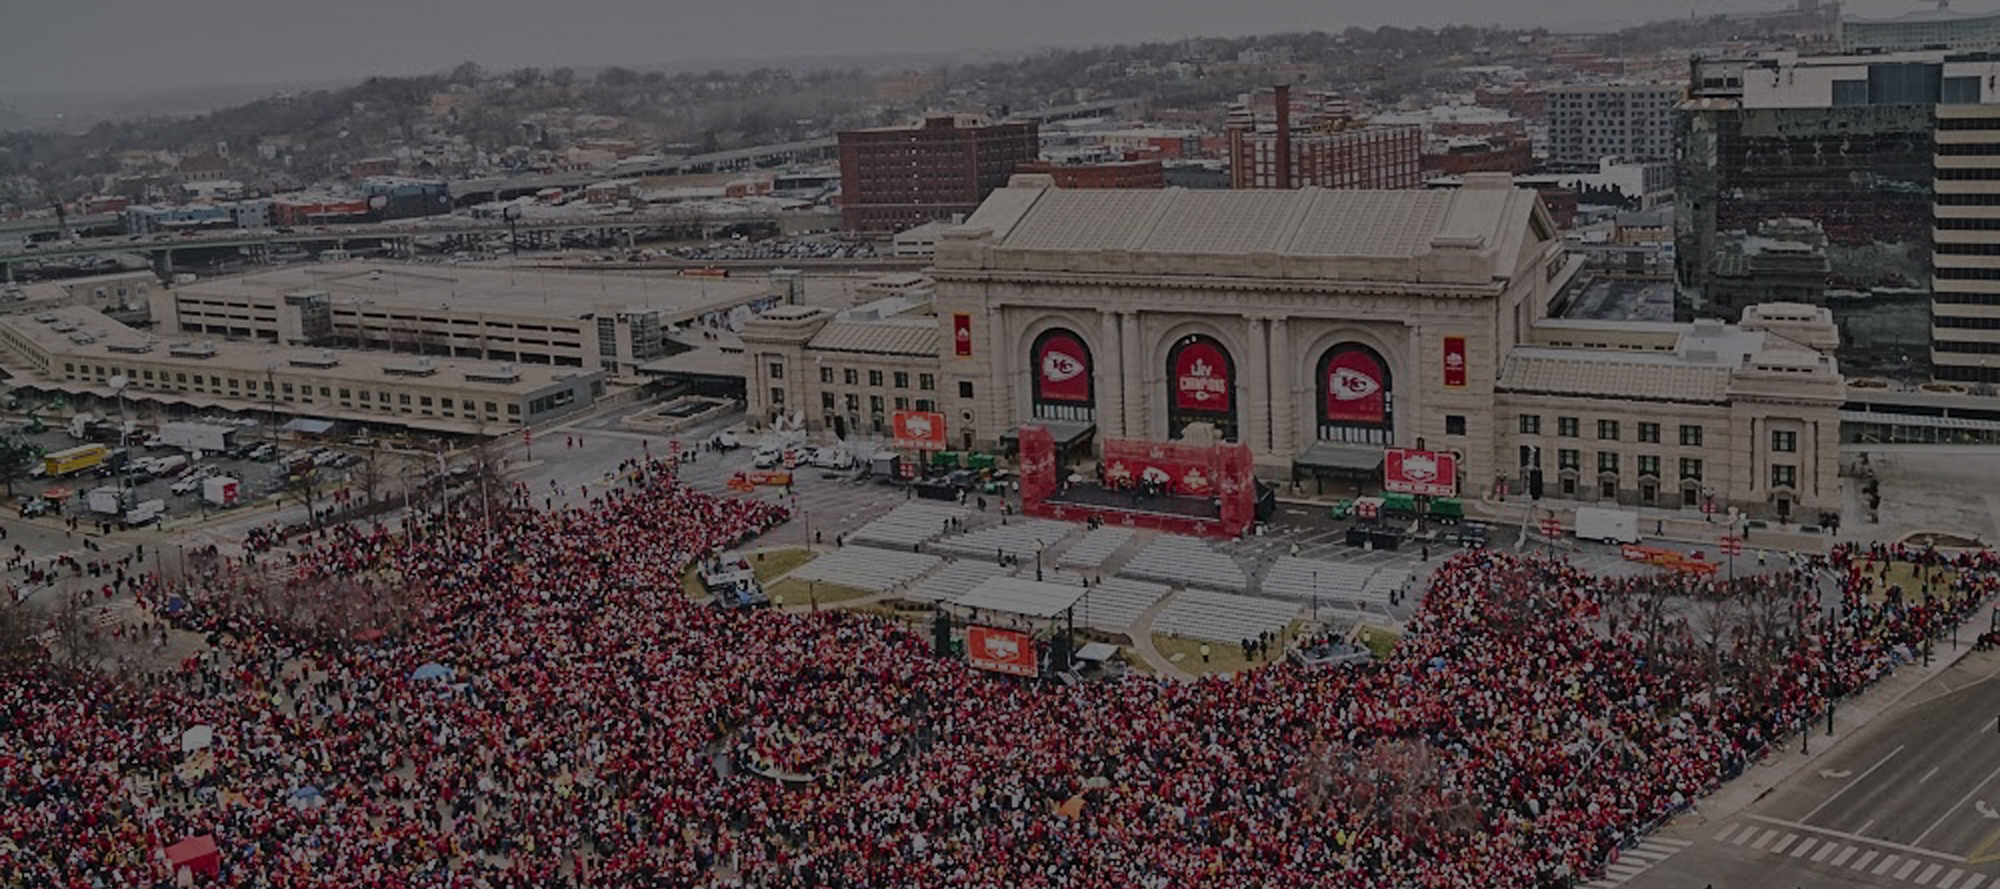 KC Chief's Super Bowl victory parade to follow Grand Blvd.